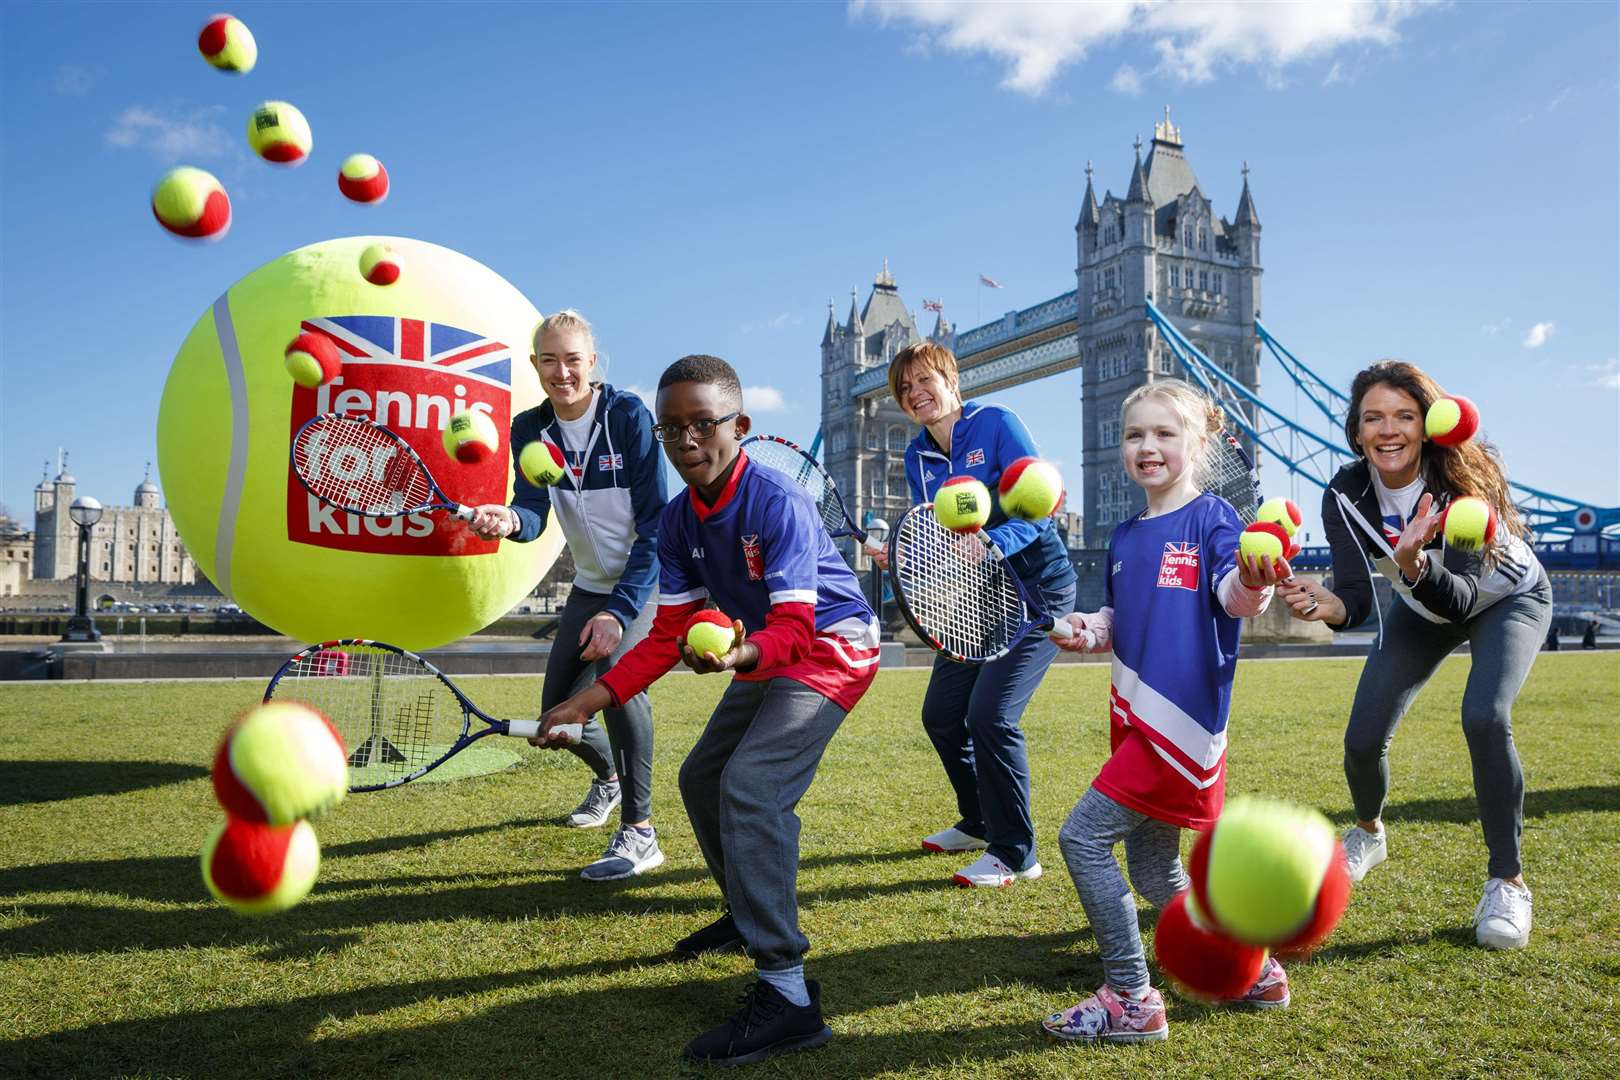 The Tennis for Kids programme includes six sessions, a racket, balls and a T-shirt, for just £25